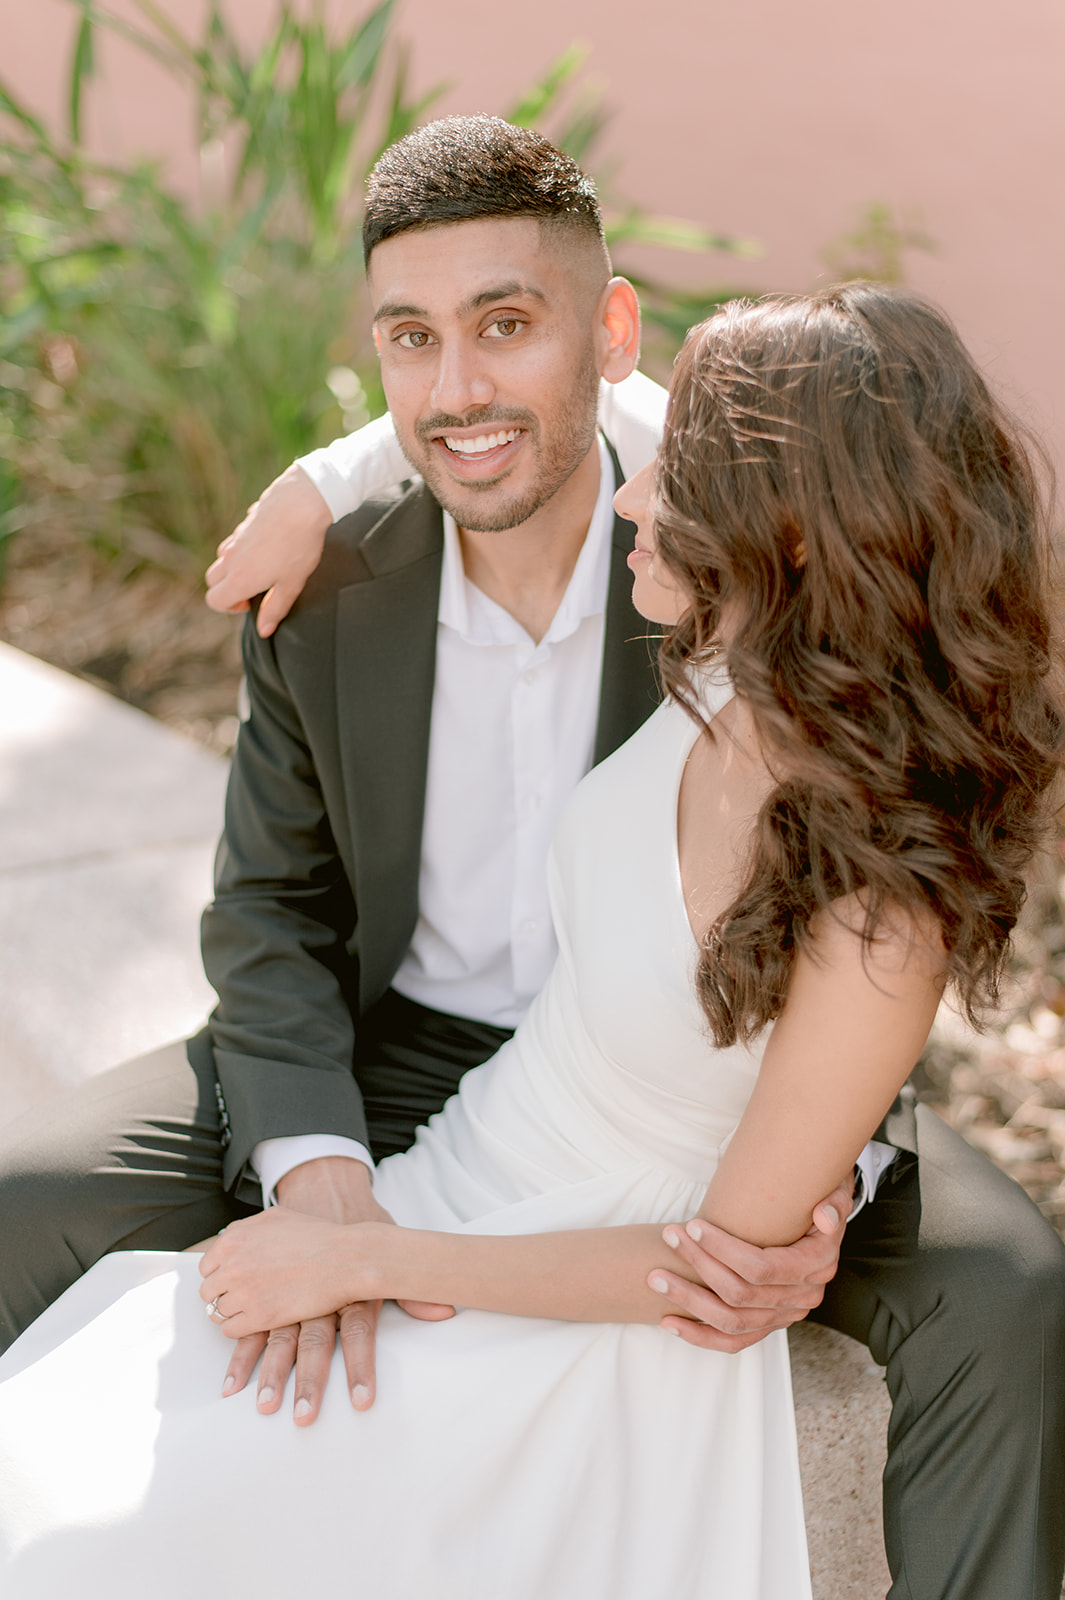 "Romantic engagement session at the Ringling Museum's Ca' d'Zan mansion features stunning Indian couple in traditional a